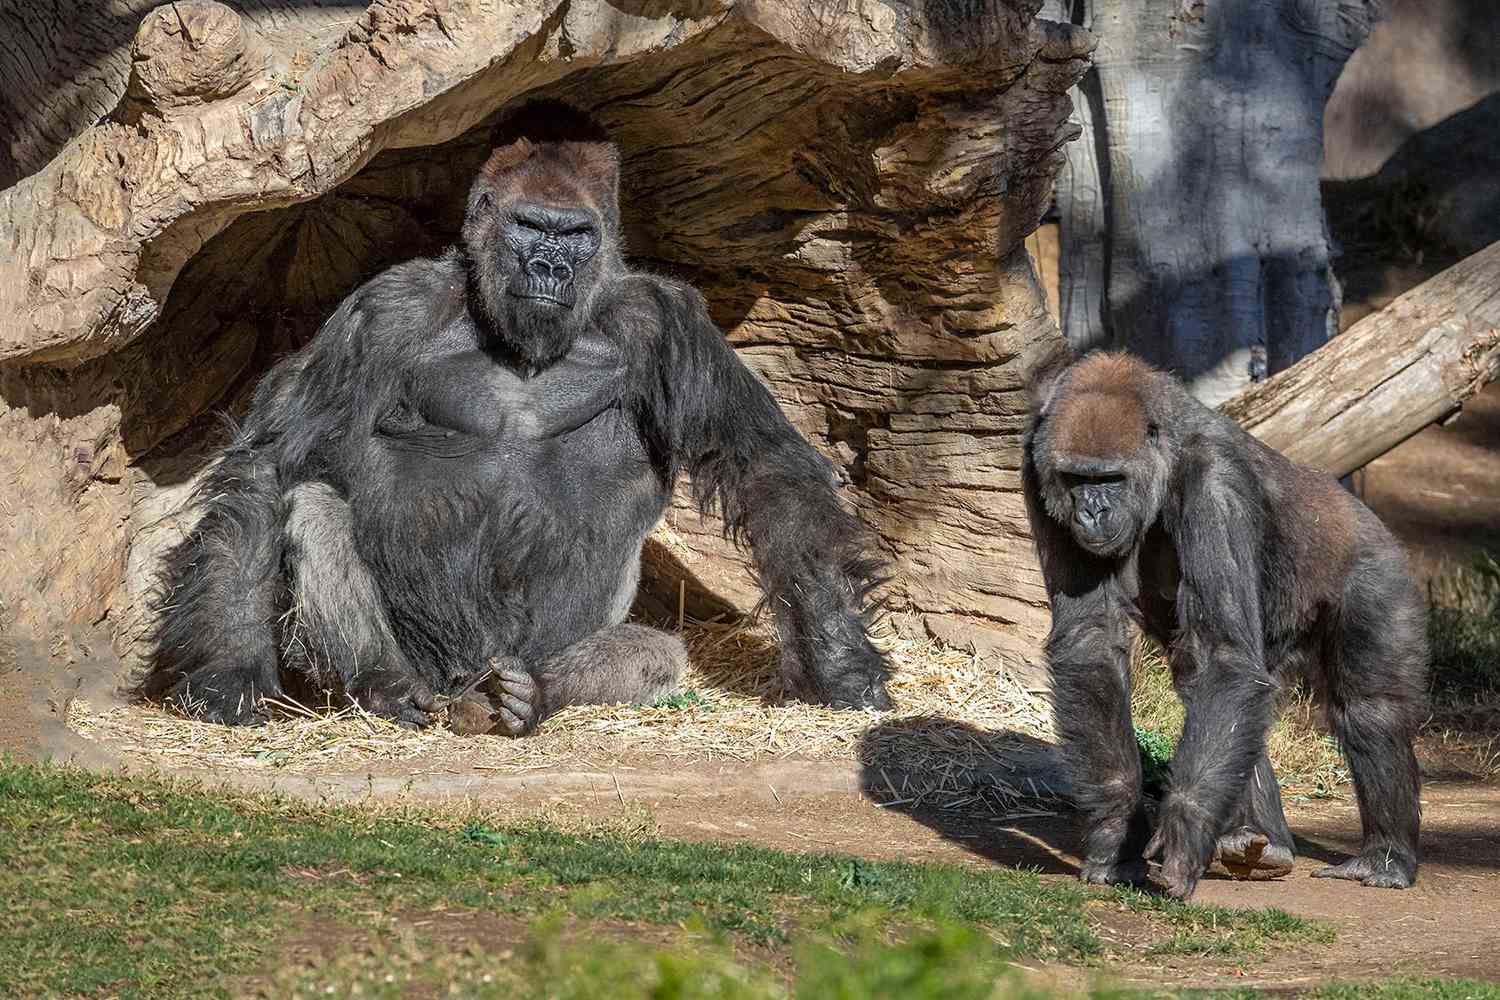 Gorilla Troop at the San Diego Zoo Safari Park Test Positive for COVID-19